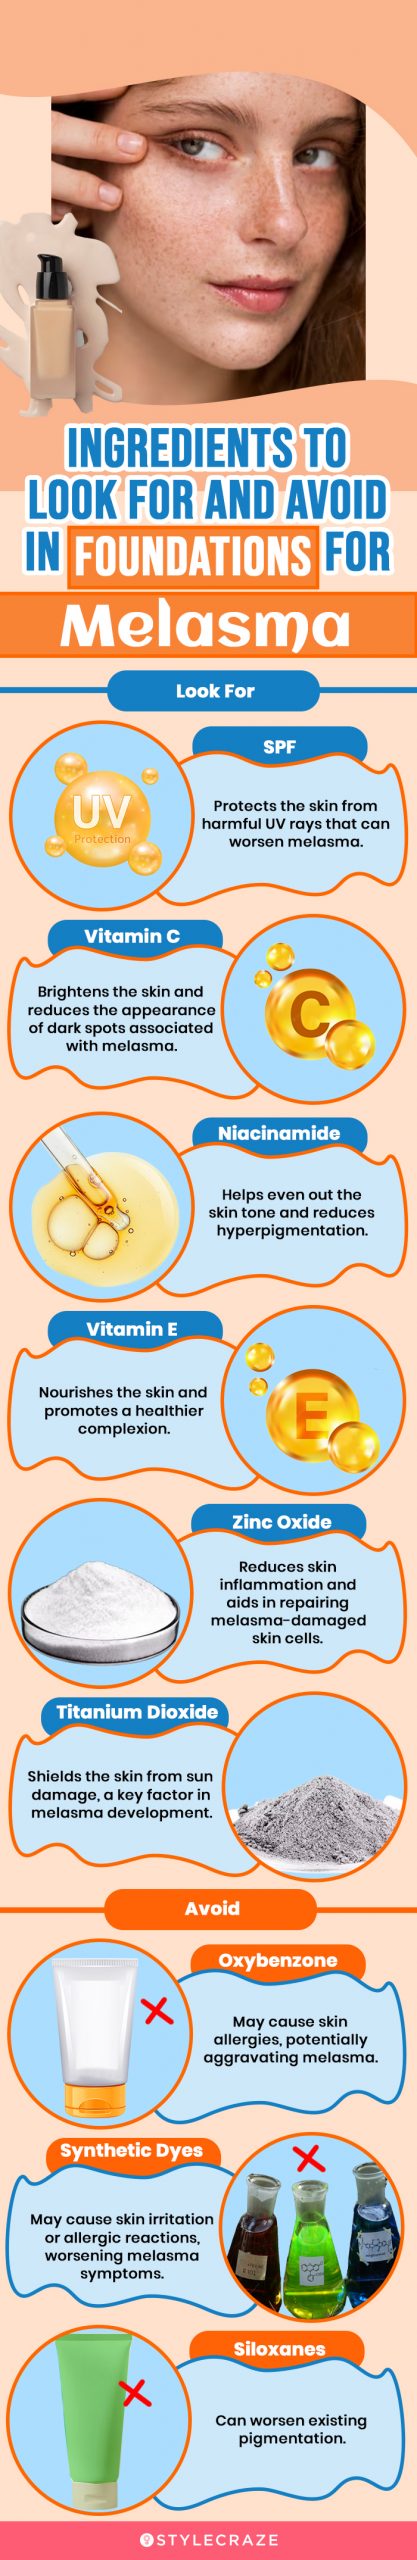 Ingredients To Look For And Avoid In Foundations For Melasma (infographic)